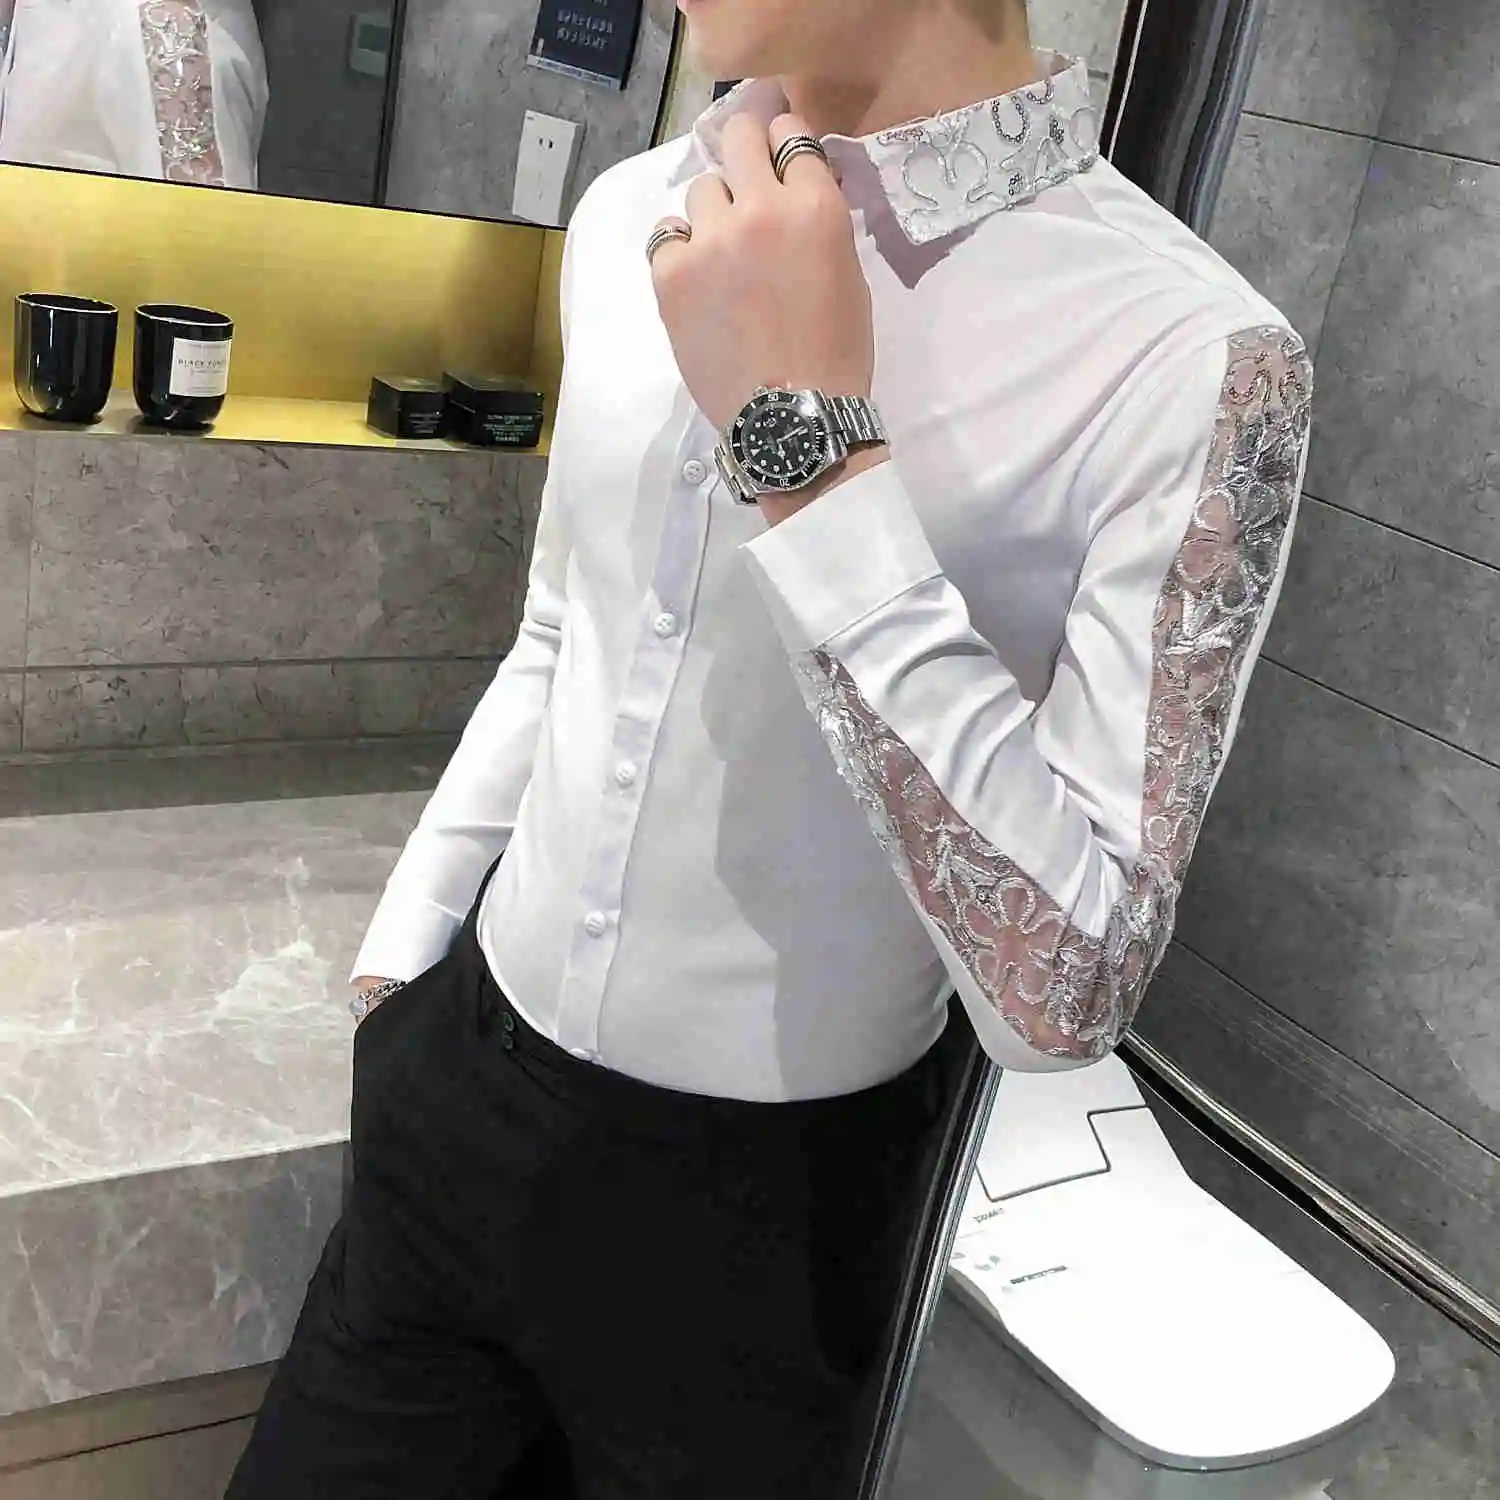 Casual s Black White Men Lace Long Sleeve Slim Fit Social Dress Shirt Camisas Masculinas Club Party Chemise Homme 4xl